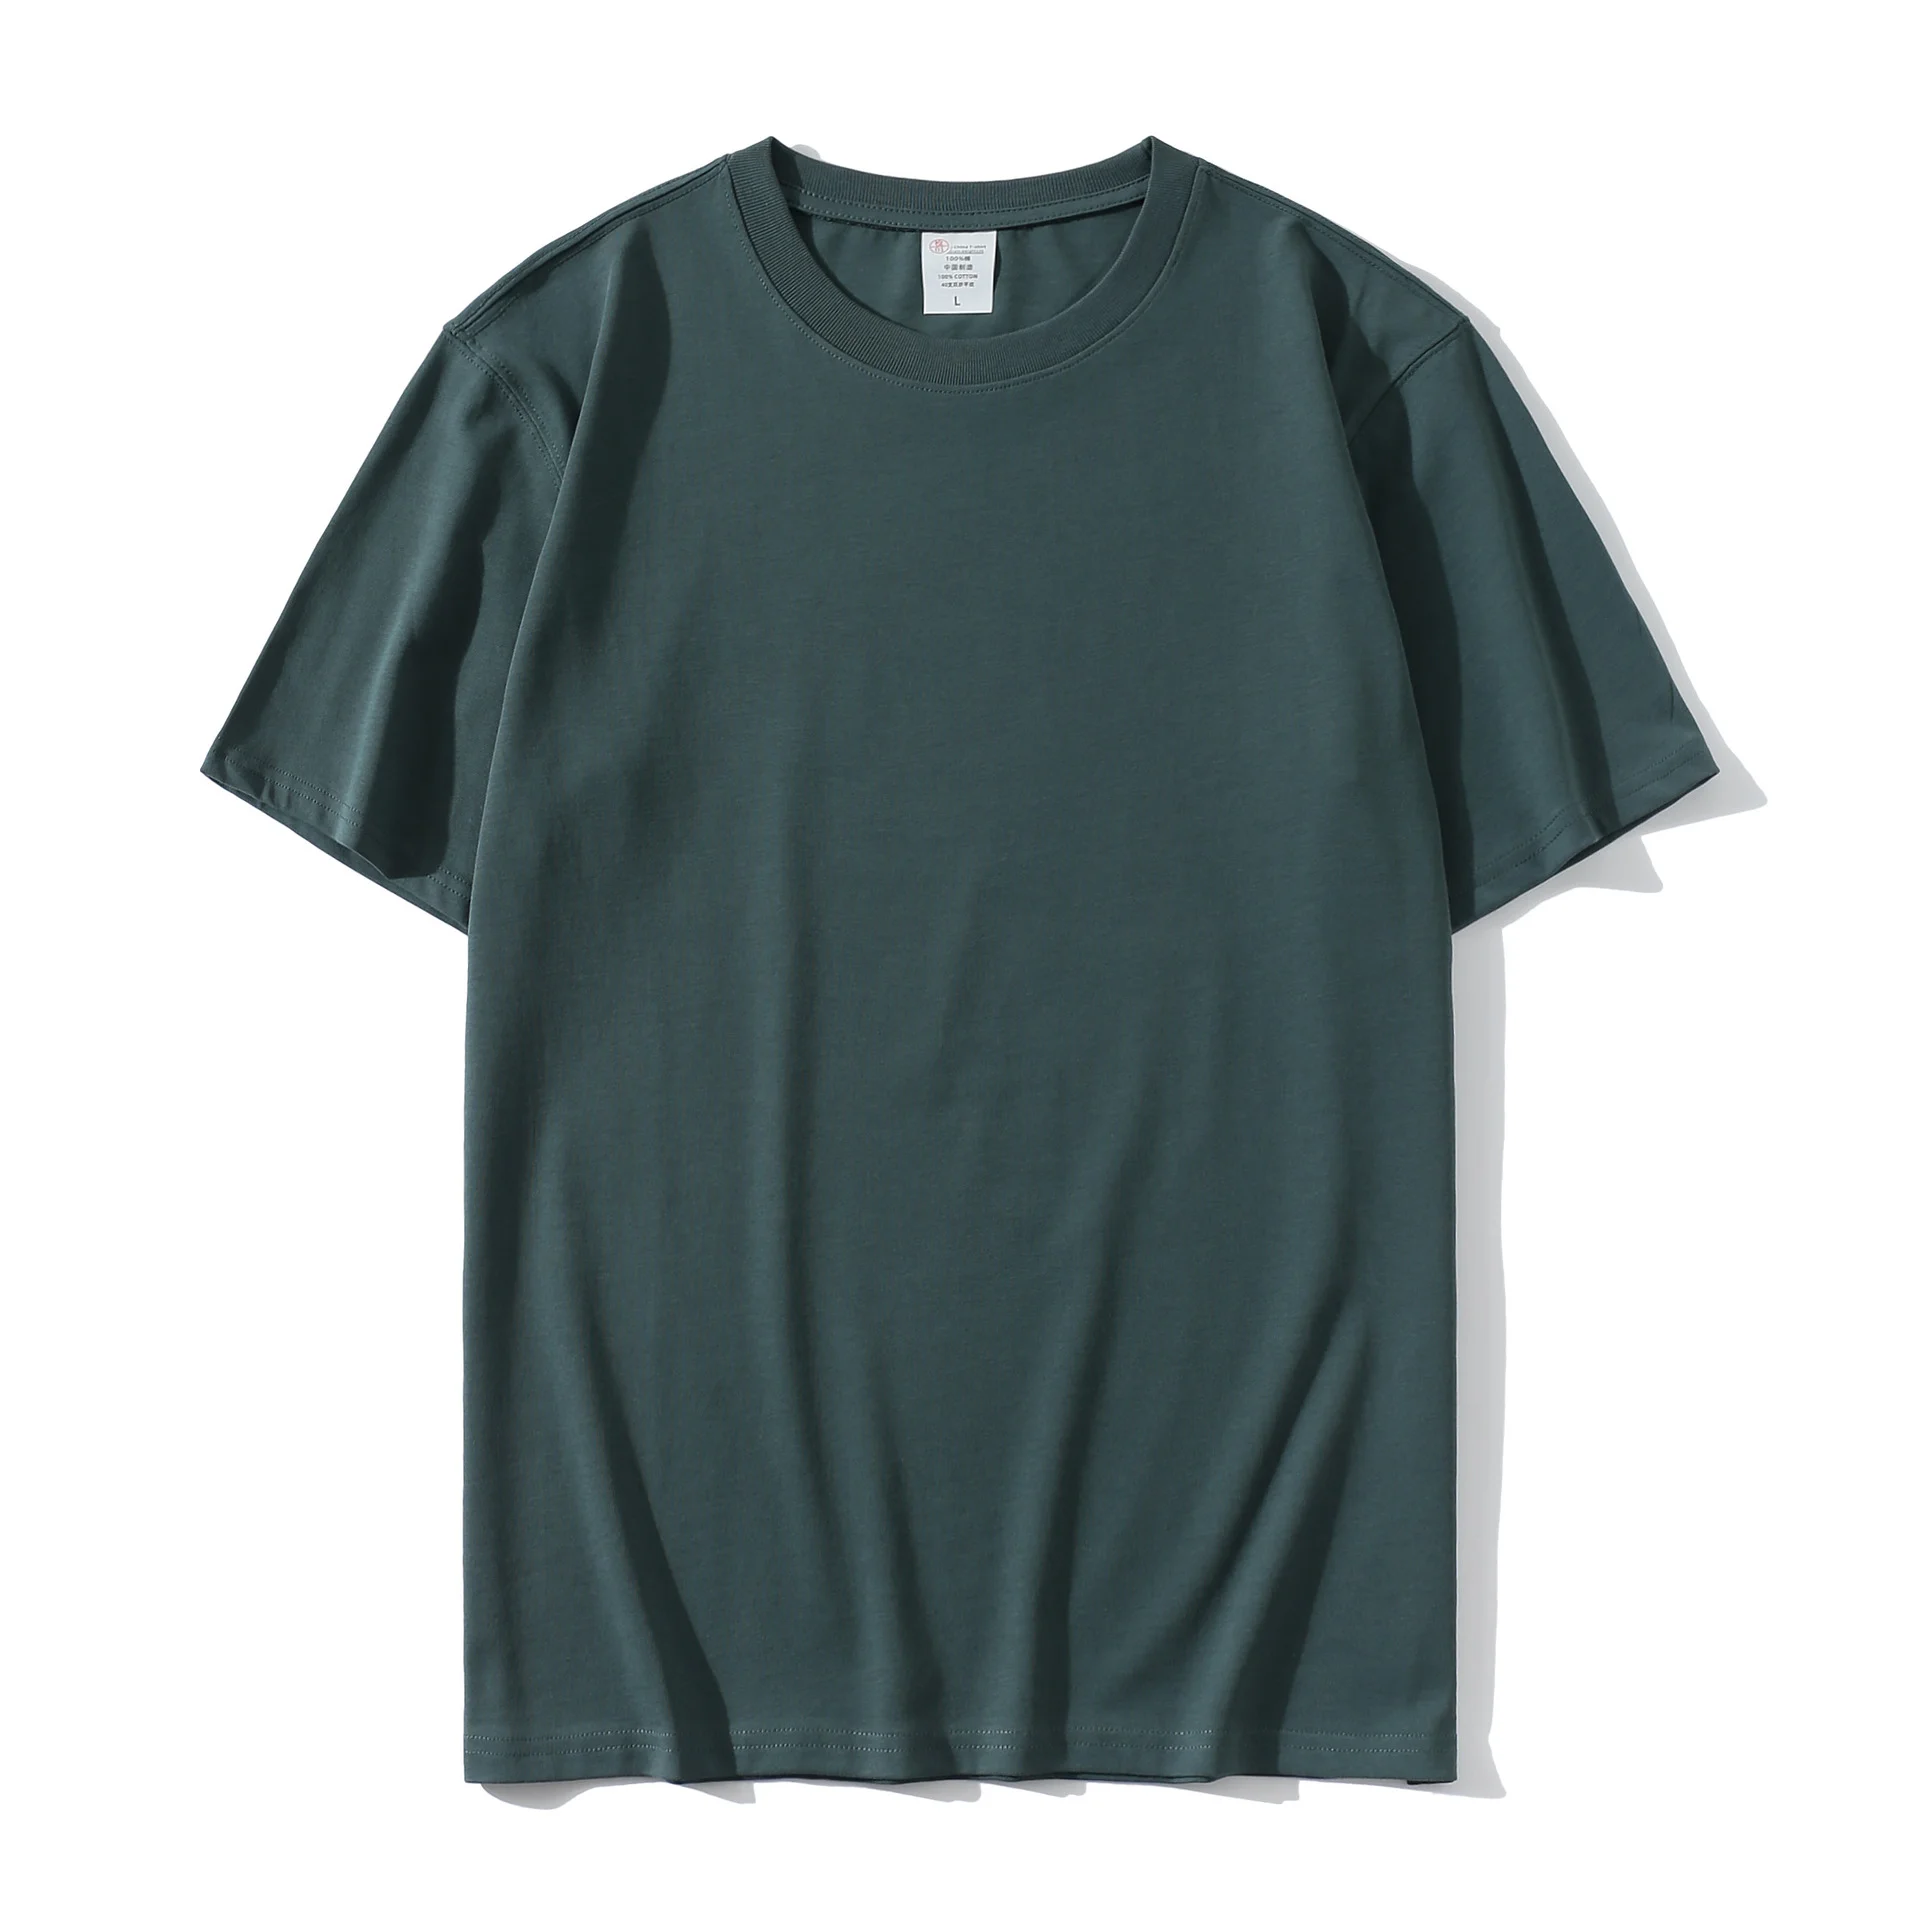 Plus Size T-shirts - Bangladesh Factory, Suppliers, Manufacturers